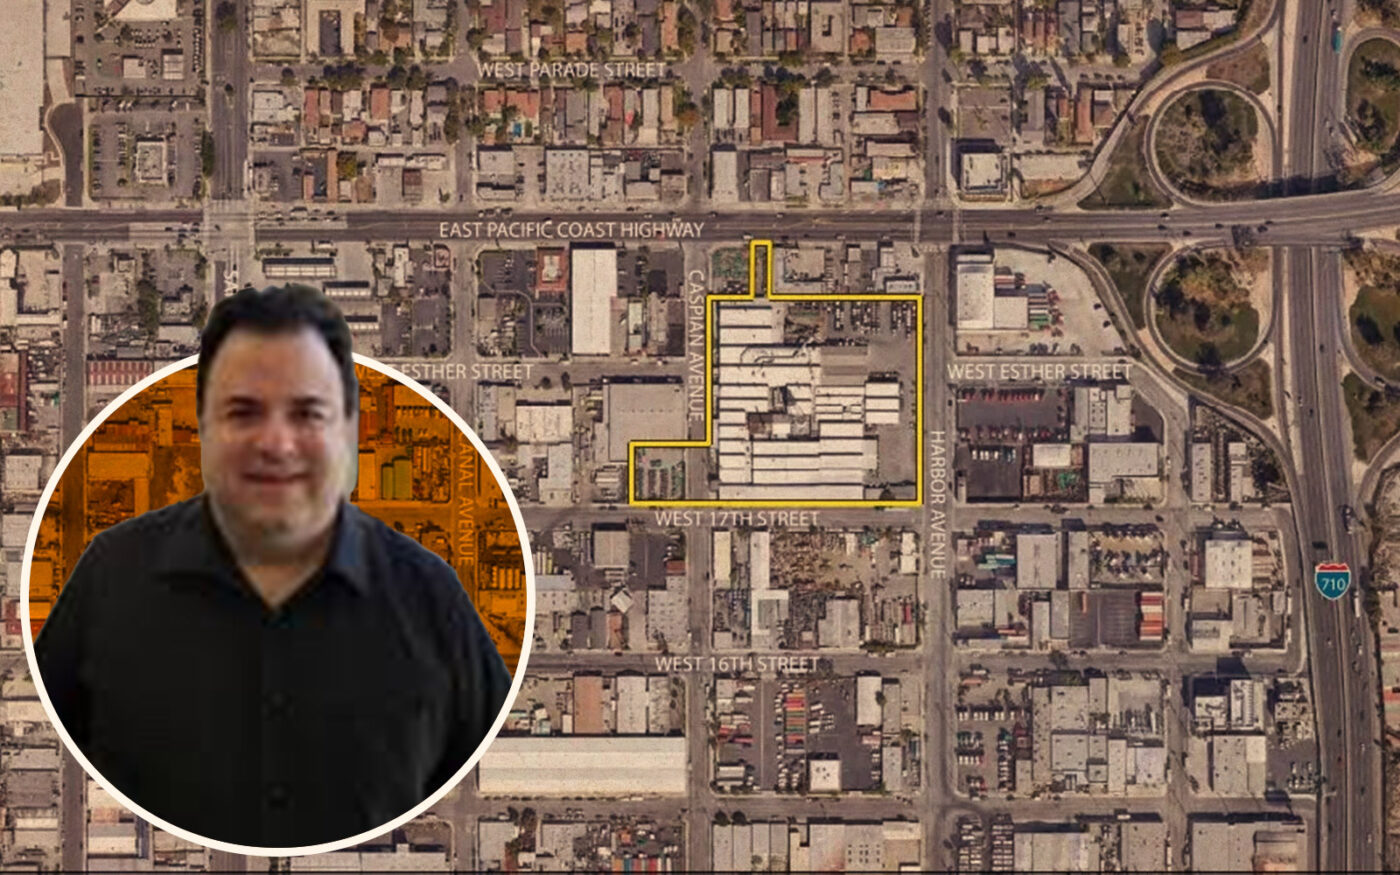 Cargomatic's Richard Gerstein; property on Caspian Avenue and West 12th Street here (City of Long Beach, Getty, Linkedin)